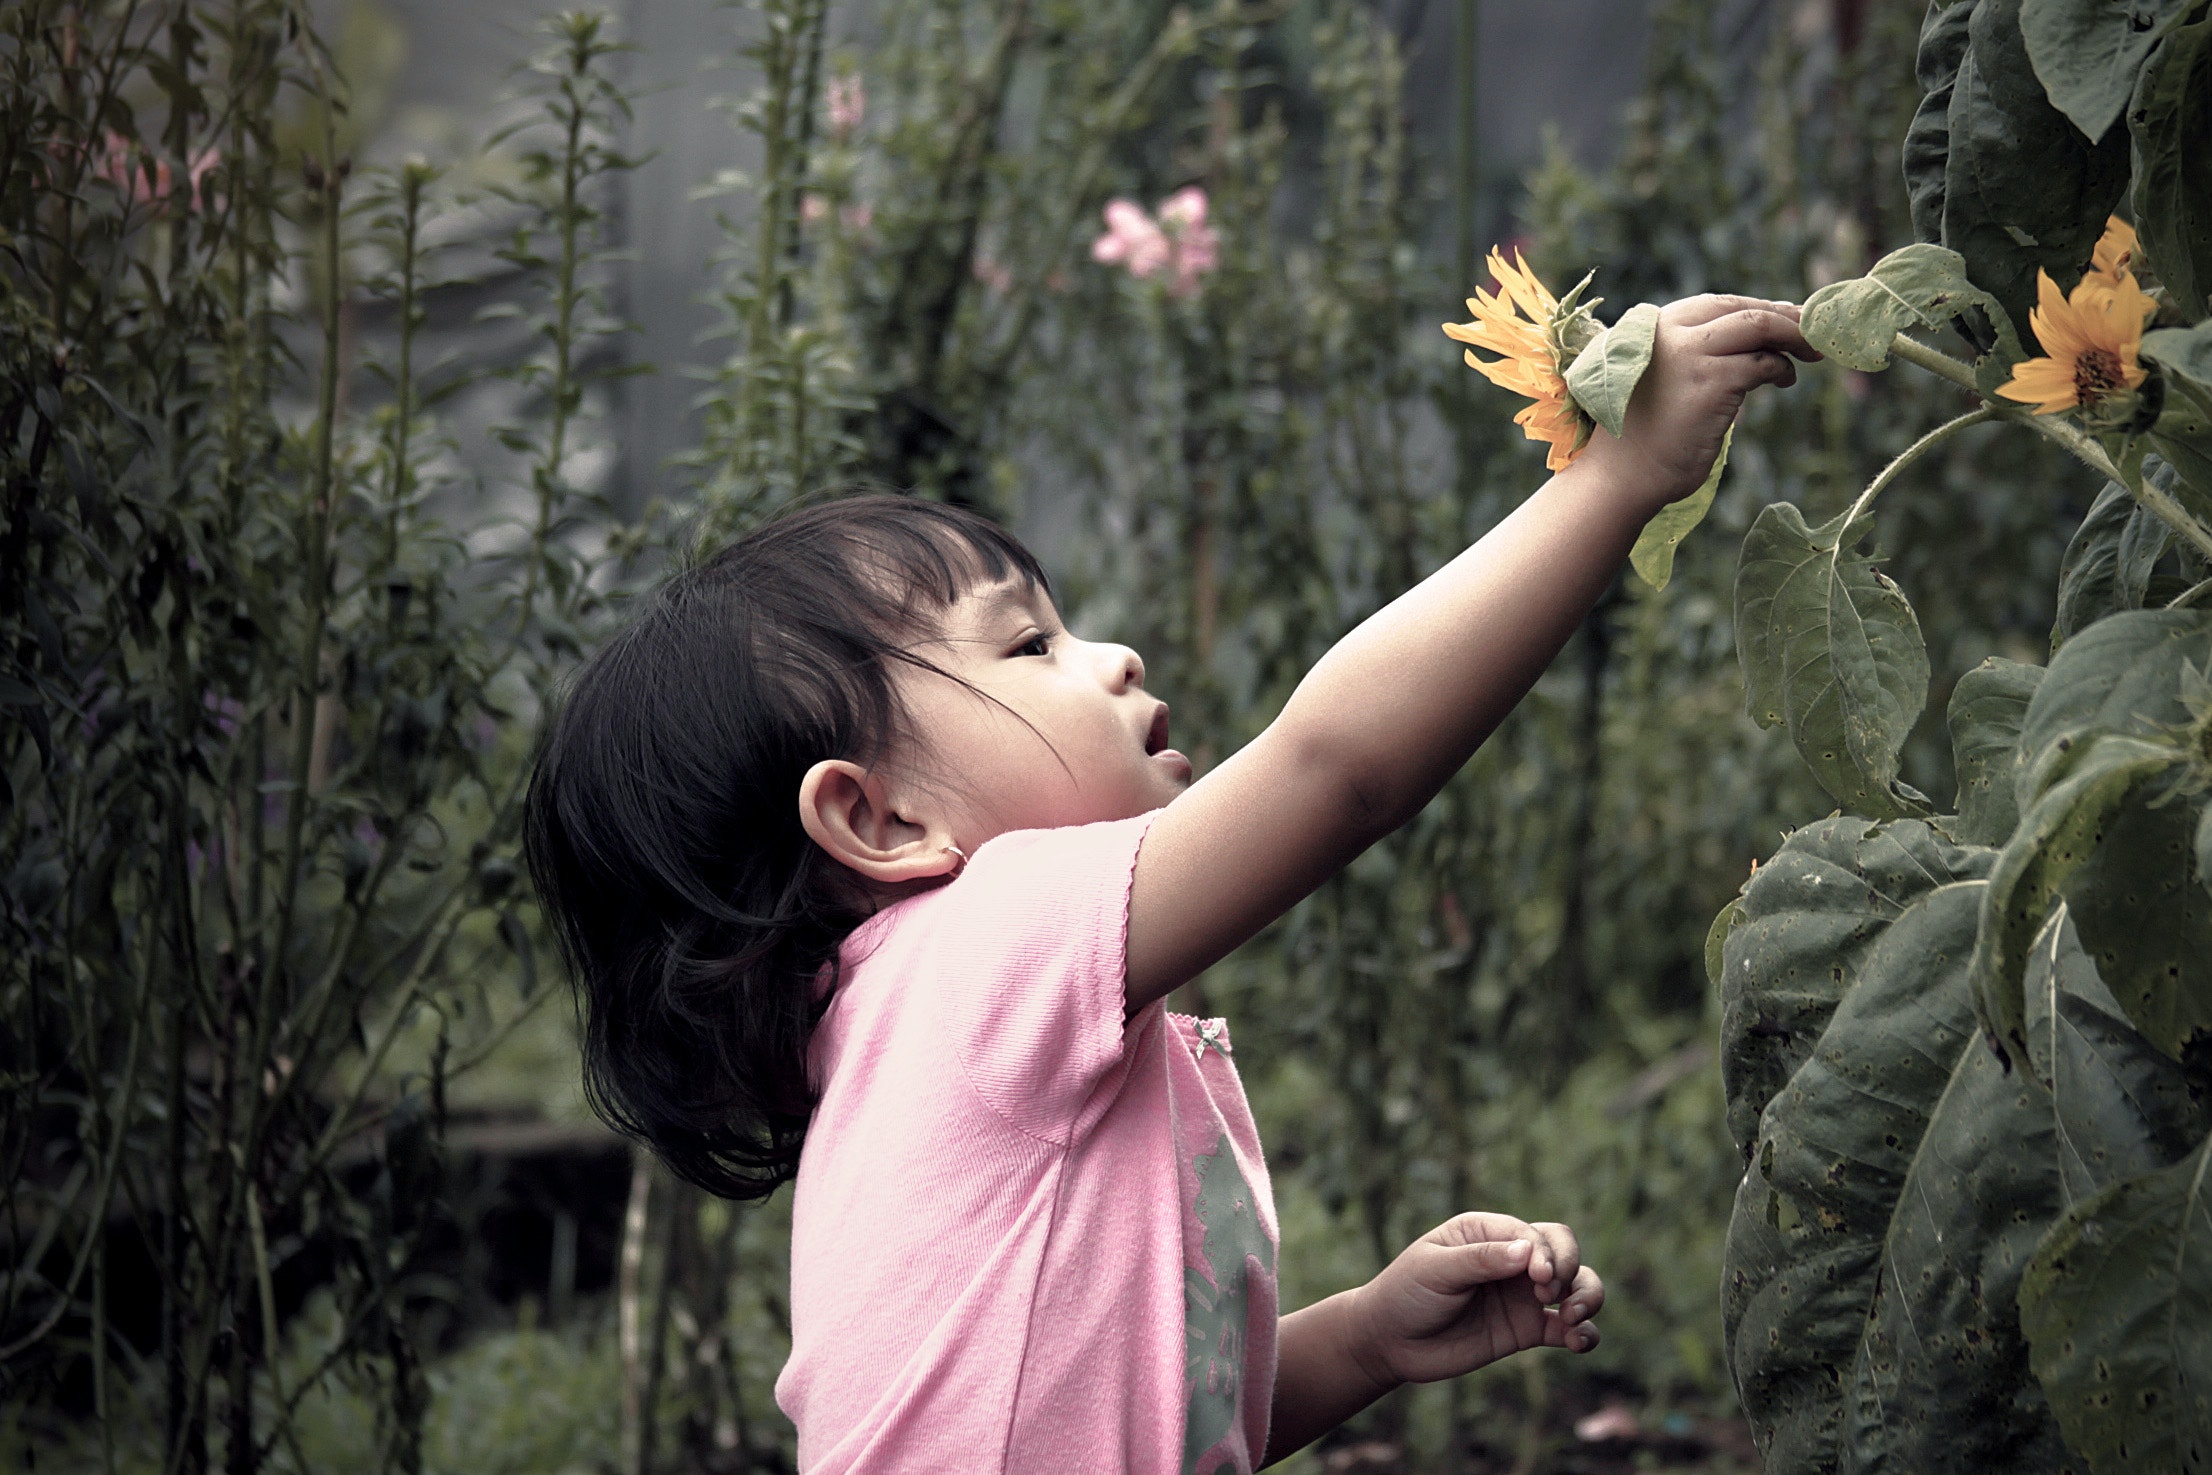 Young child examines a sunflower plant in a garden